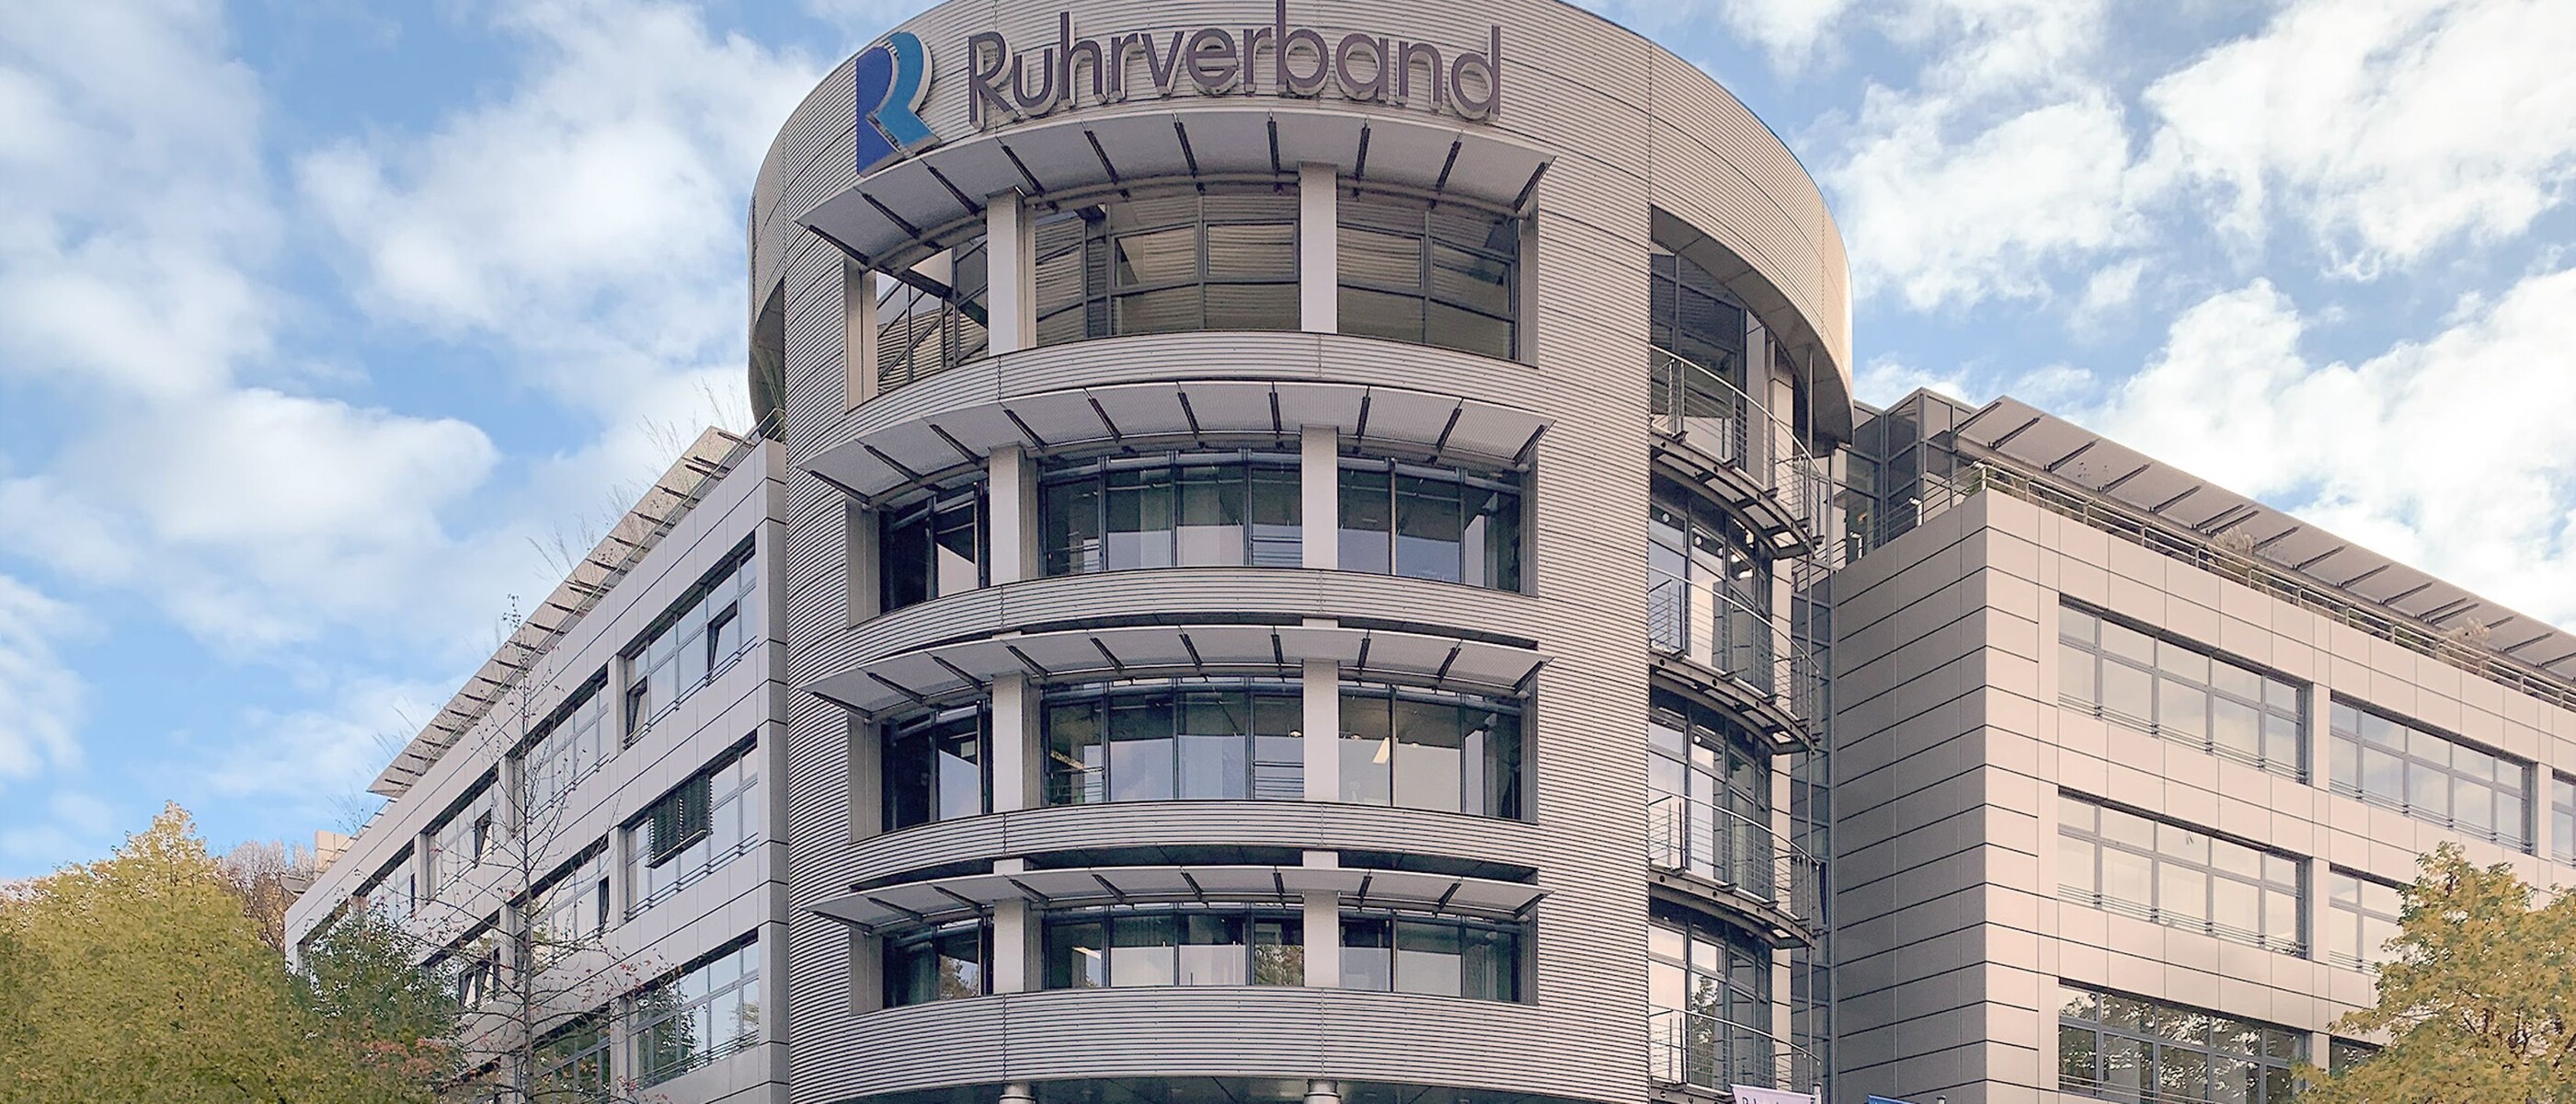 Building containing the Ruhrverband’s headquarters in Essen from the outside